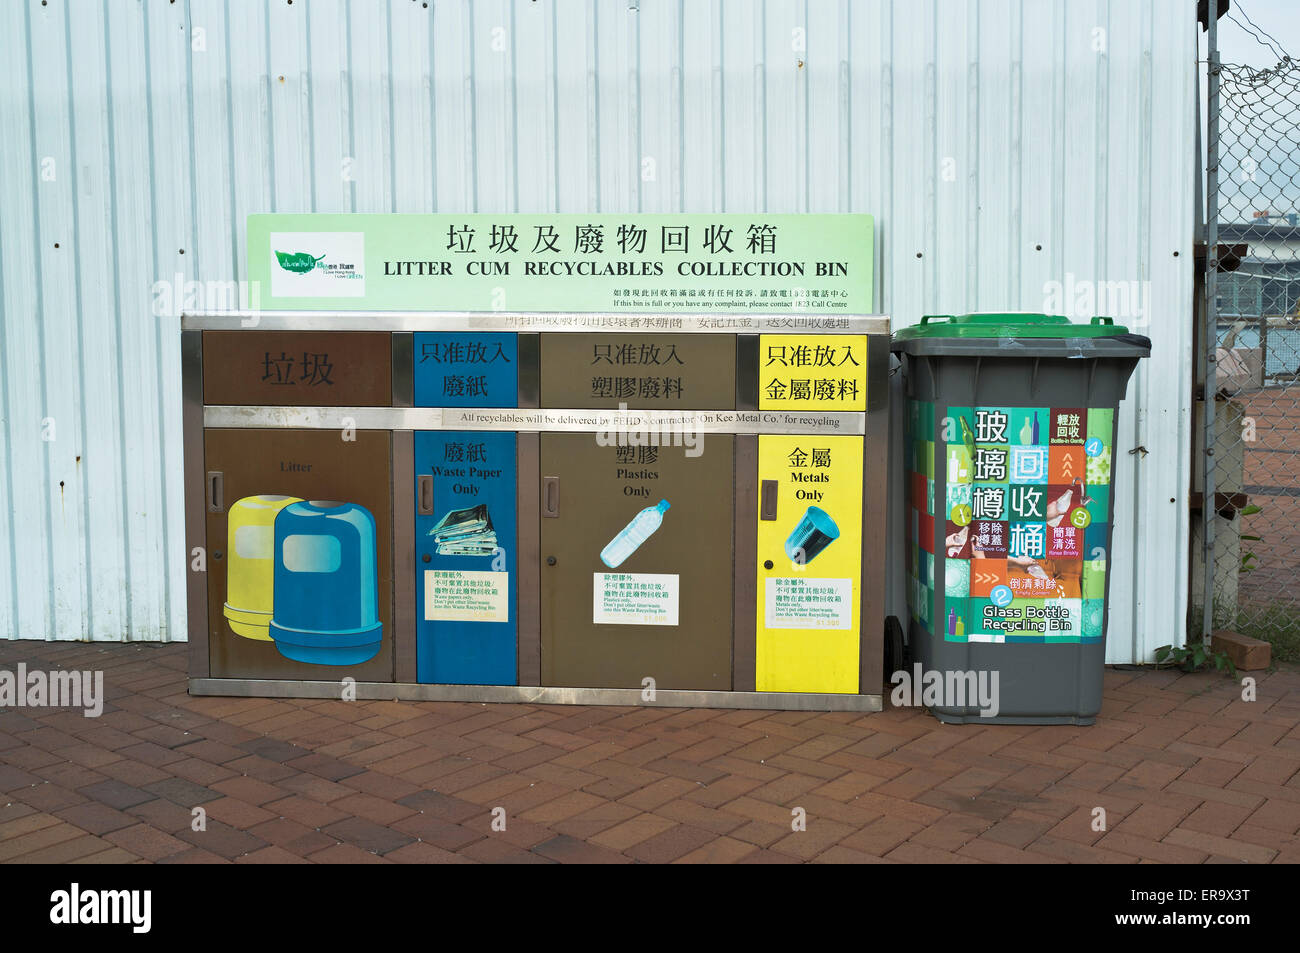 dh Recycling bins ENVIRONMENT HONG KONG Recycling collection point litter bins recycle china bin points Stock Photo